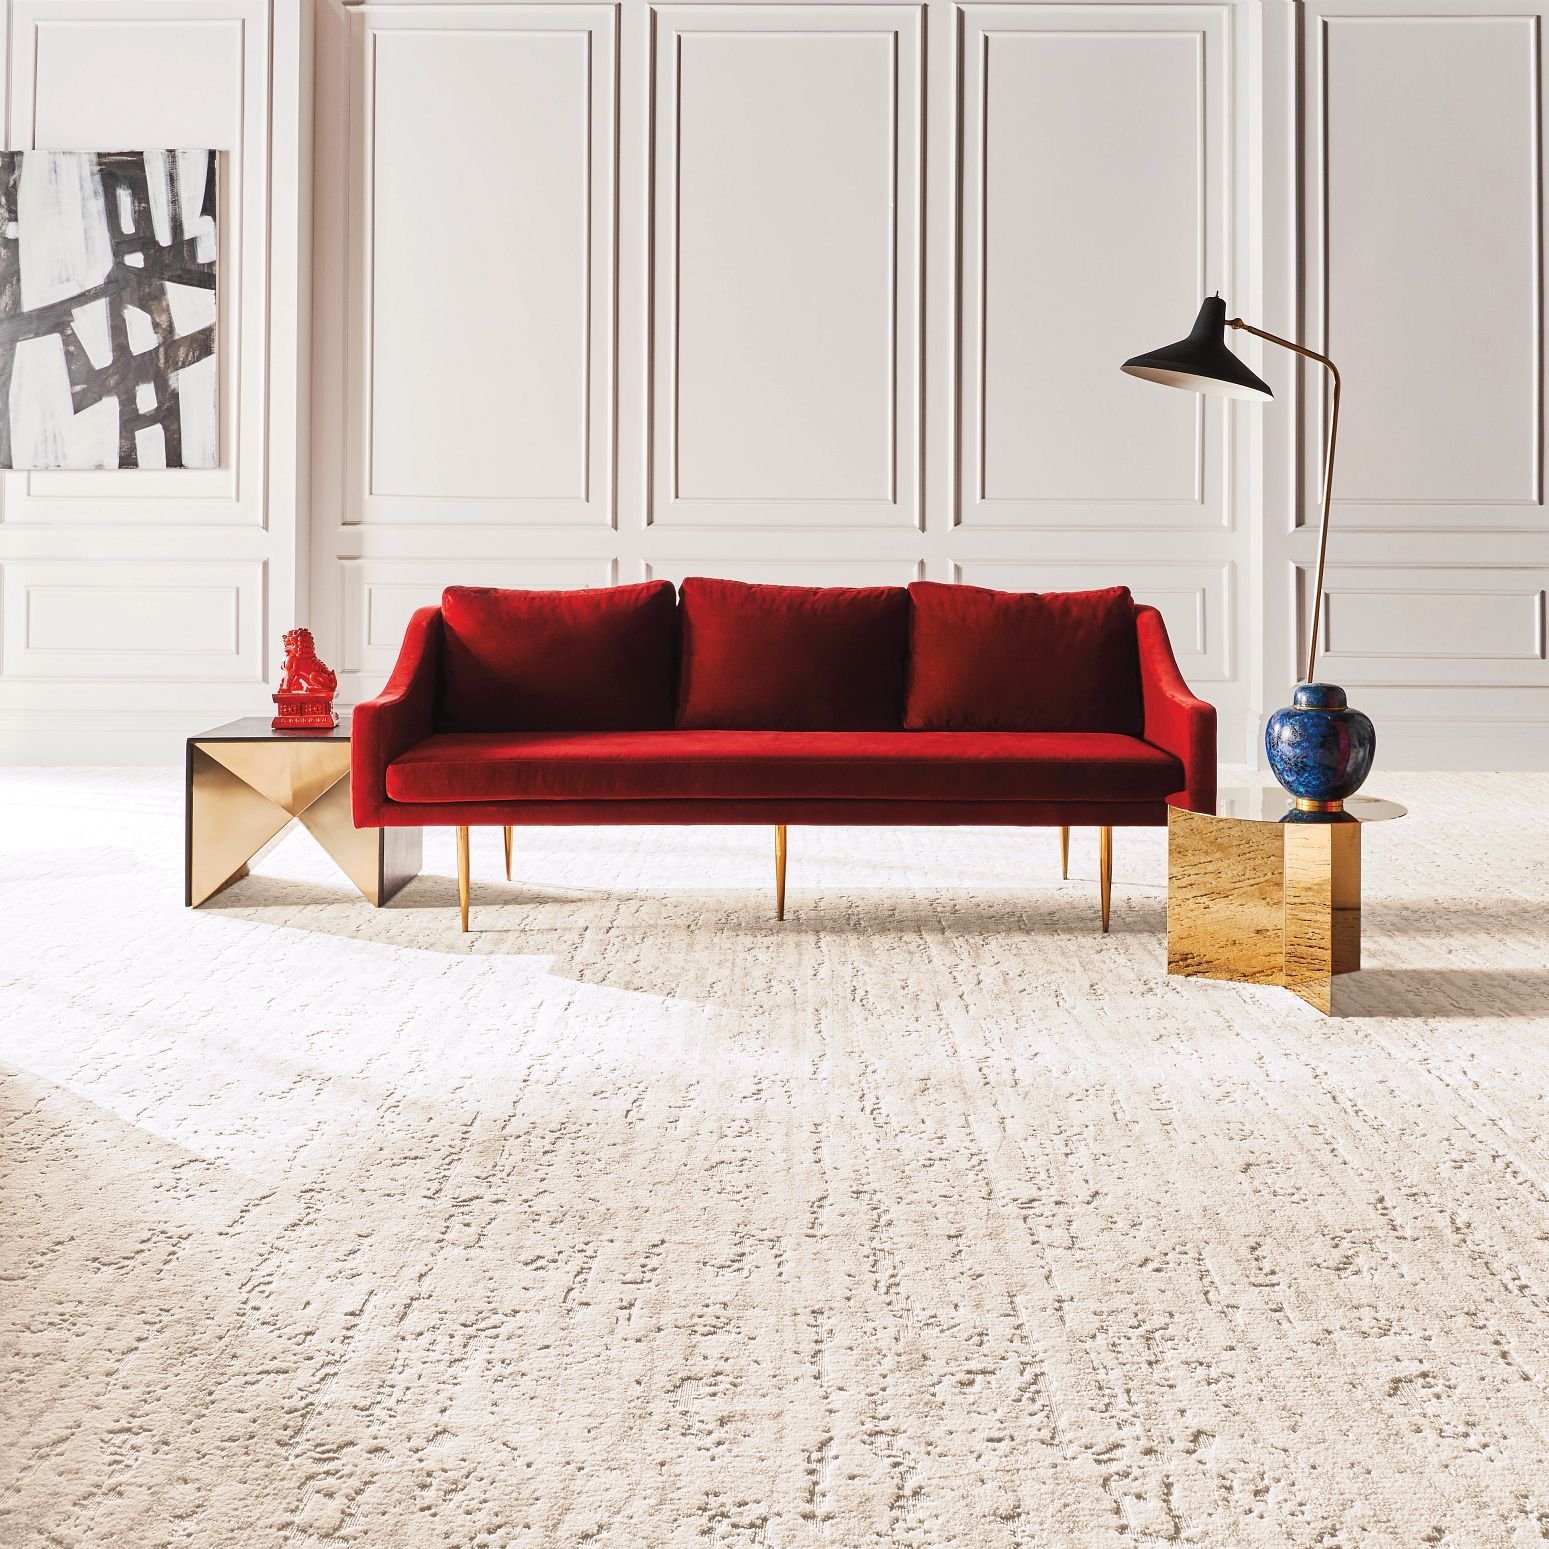 Carpets of Dalton Furniture: Elevating Home Interiors with Style插图4